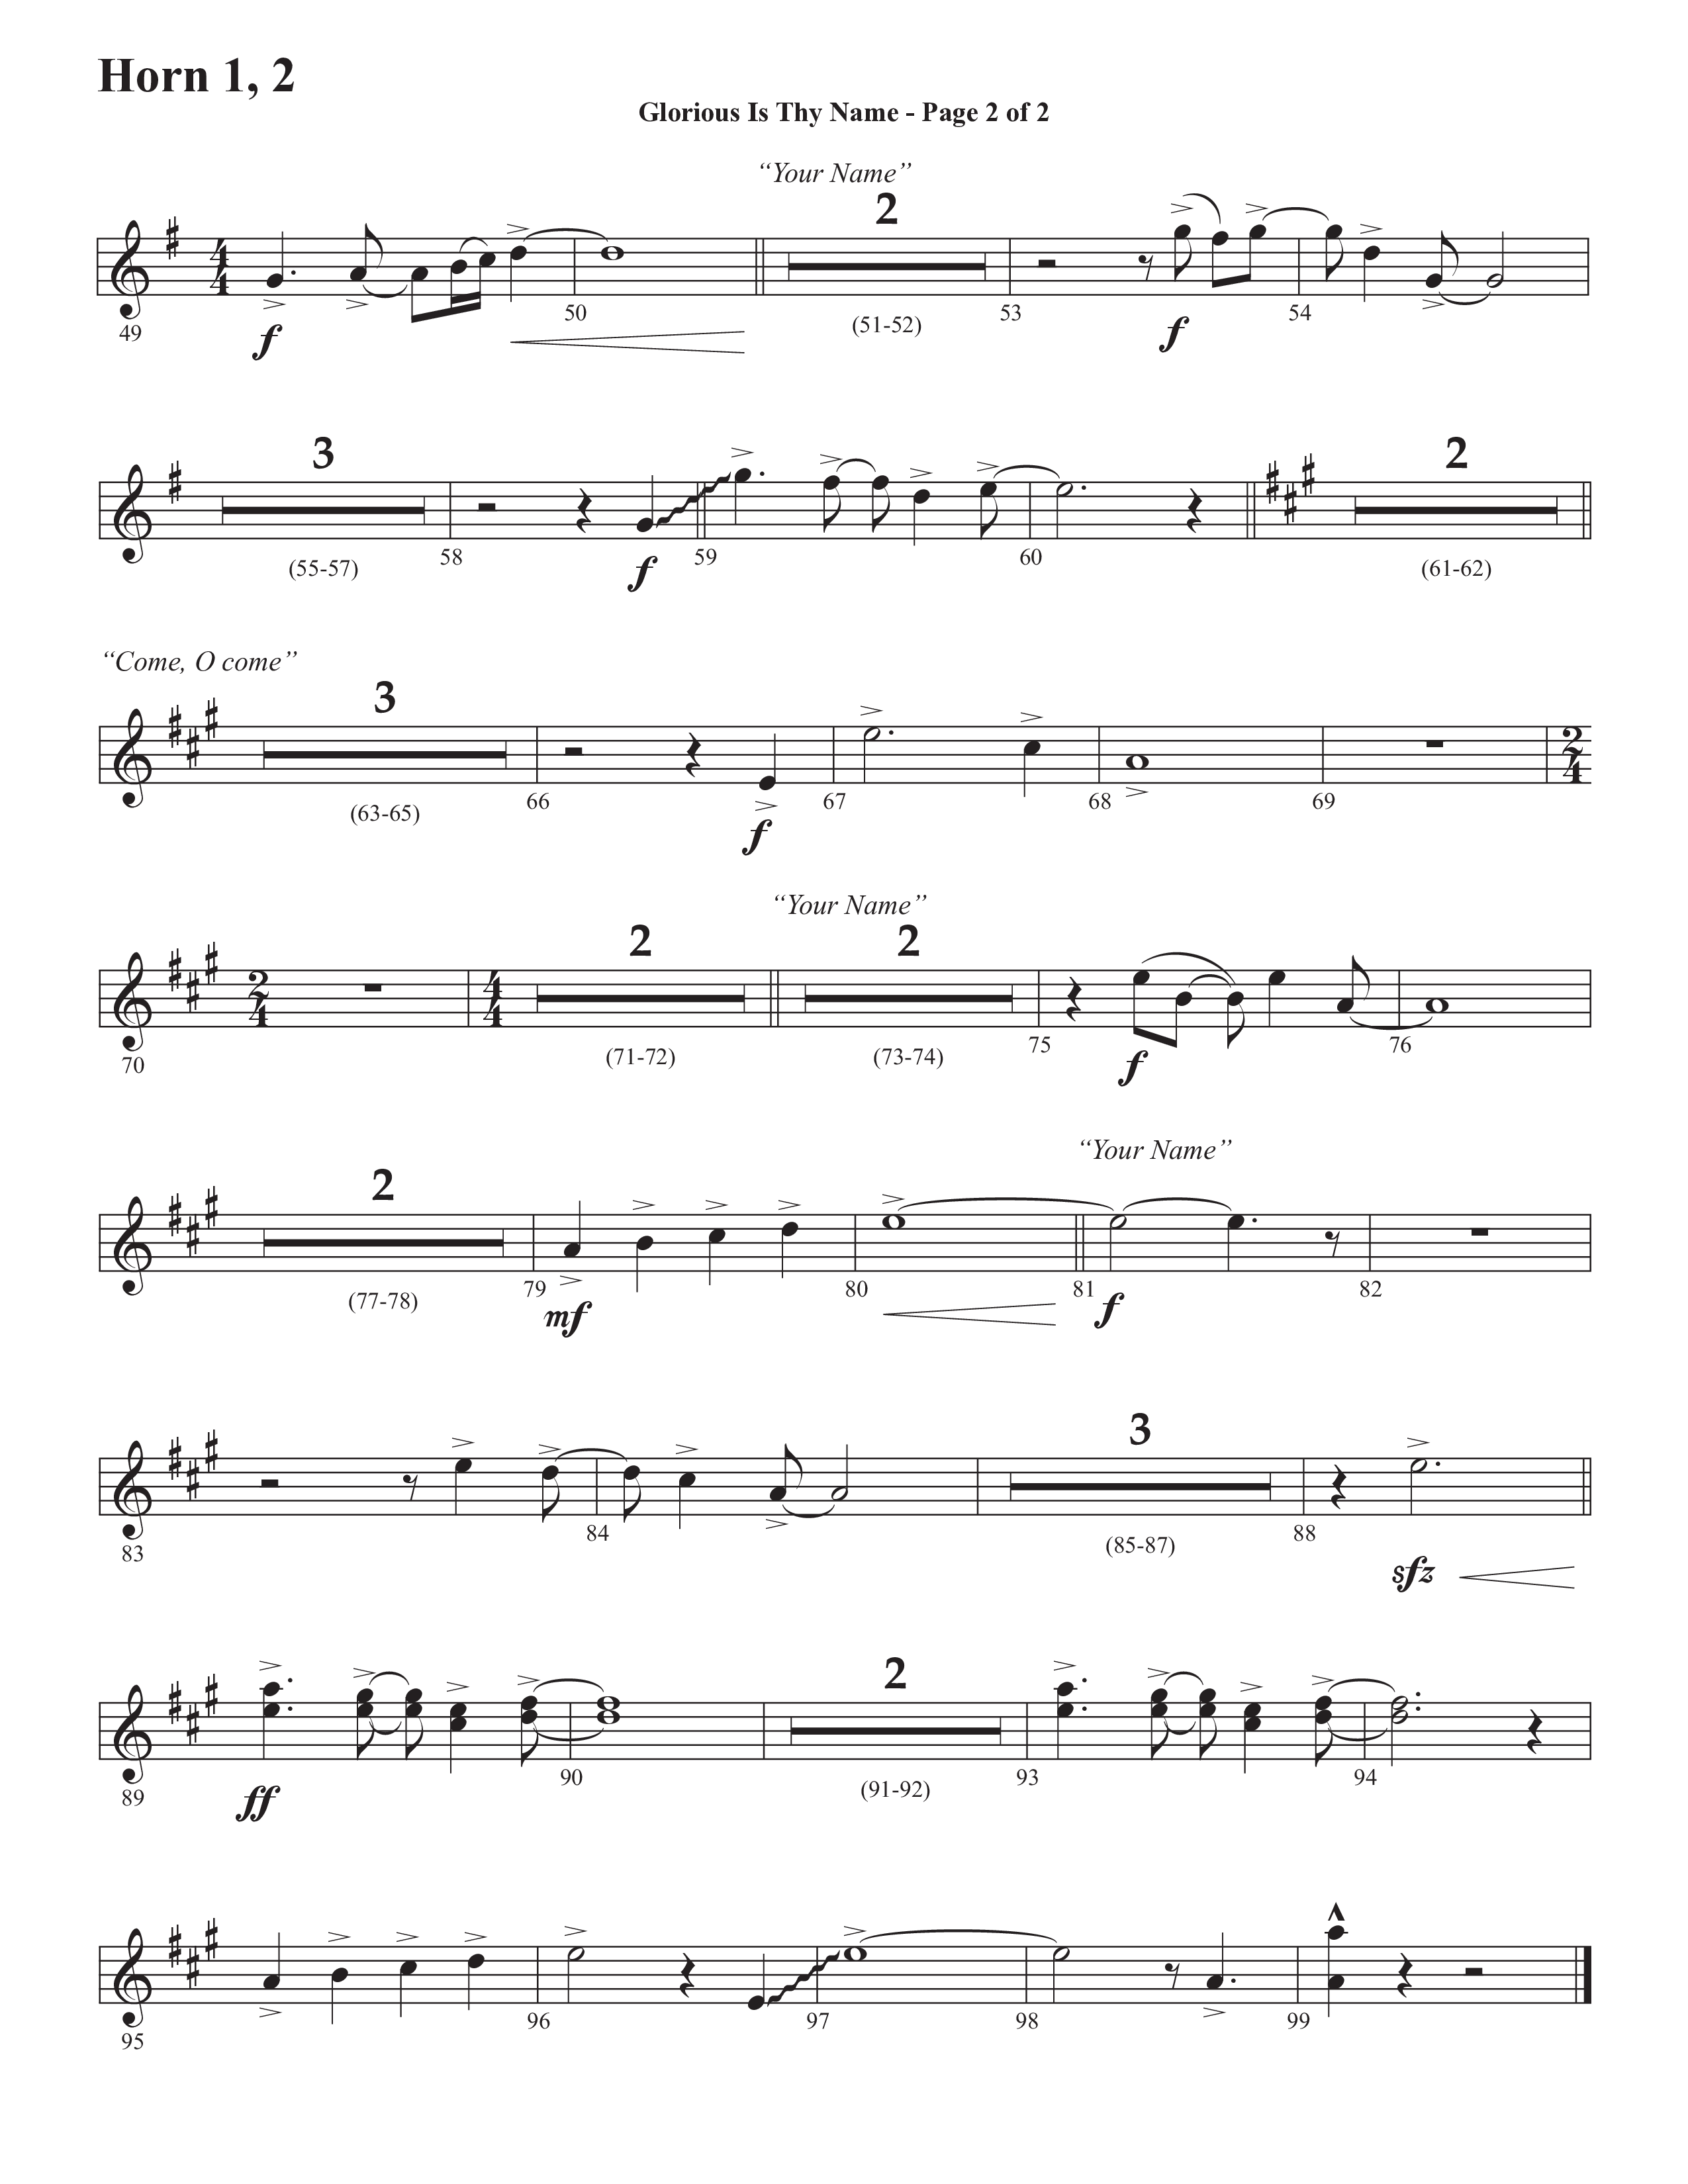 Glorious Is Thy Name (with Your Name) (Choral Anthem SATB) French Horn 1/2 (Semsen Music / Arr. John Bolin / Orch. Cliff Duren)